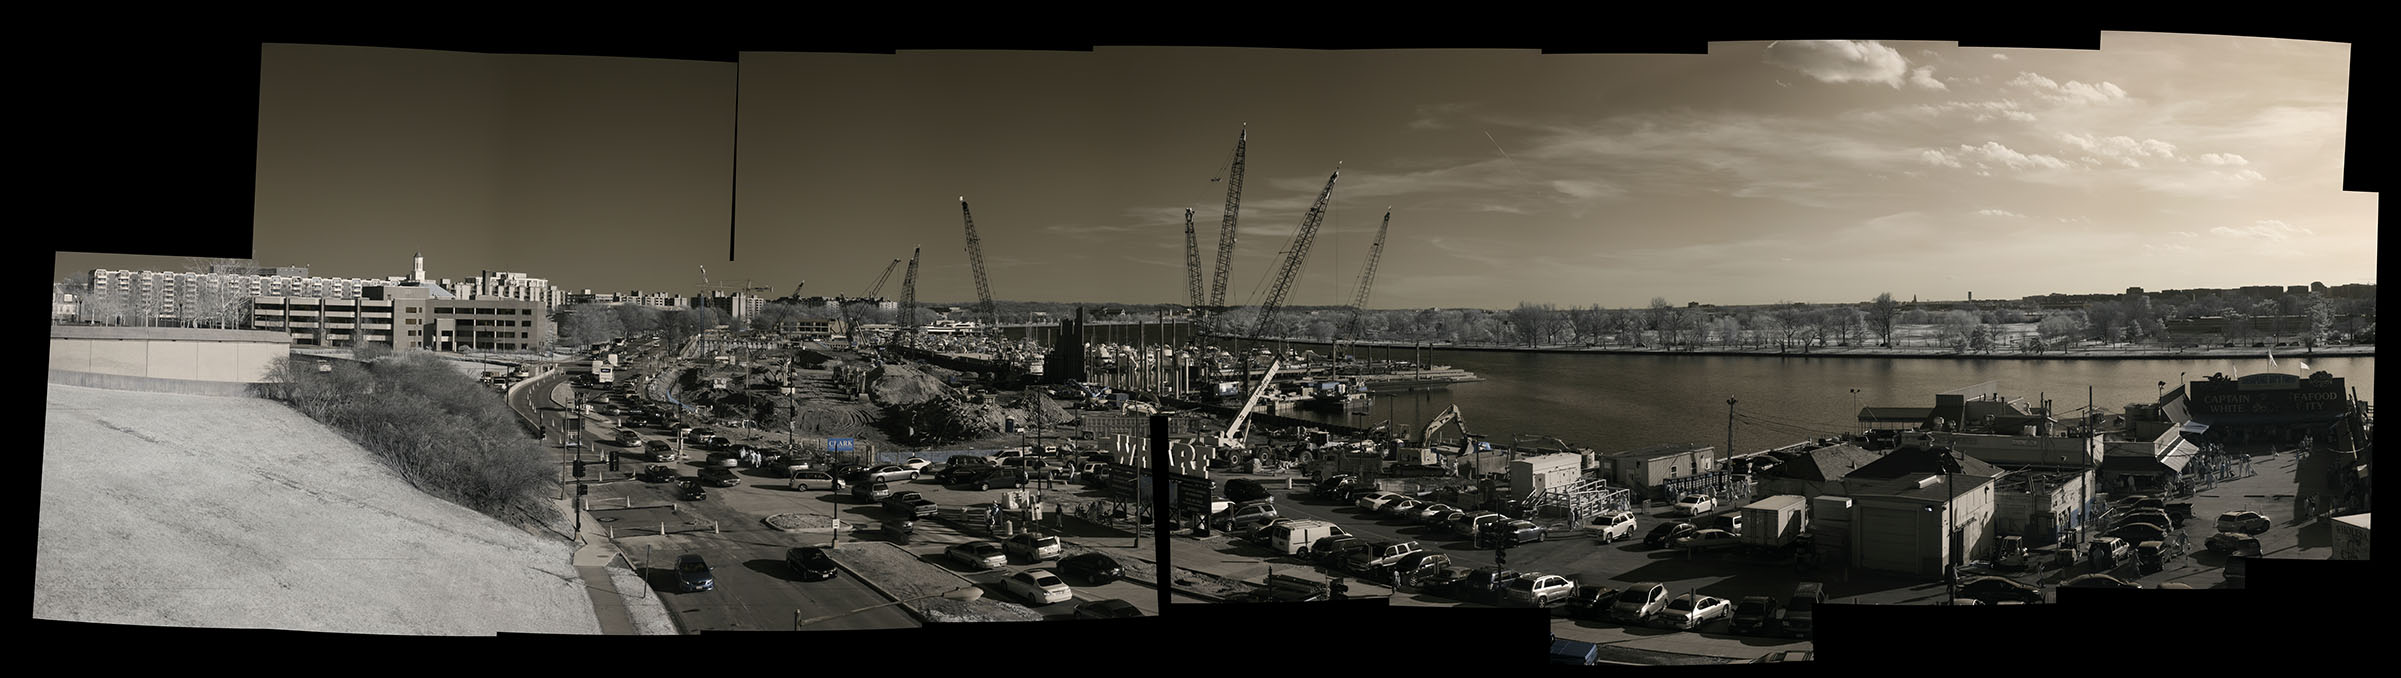 Large Infrared Panorama Photo Proof of Waterfront and Construction Site.